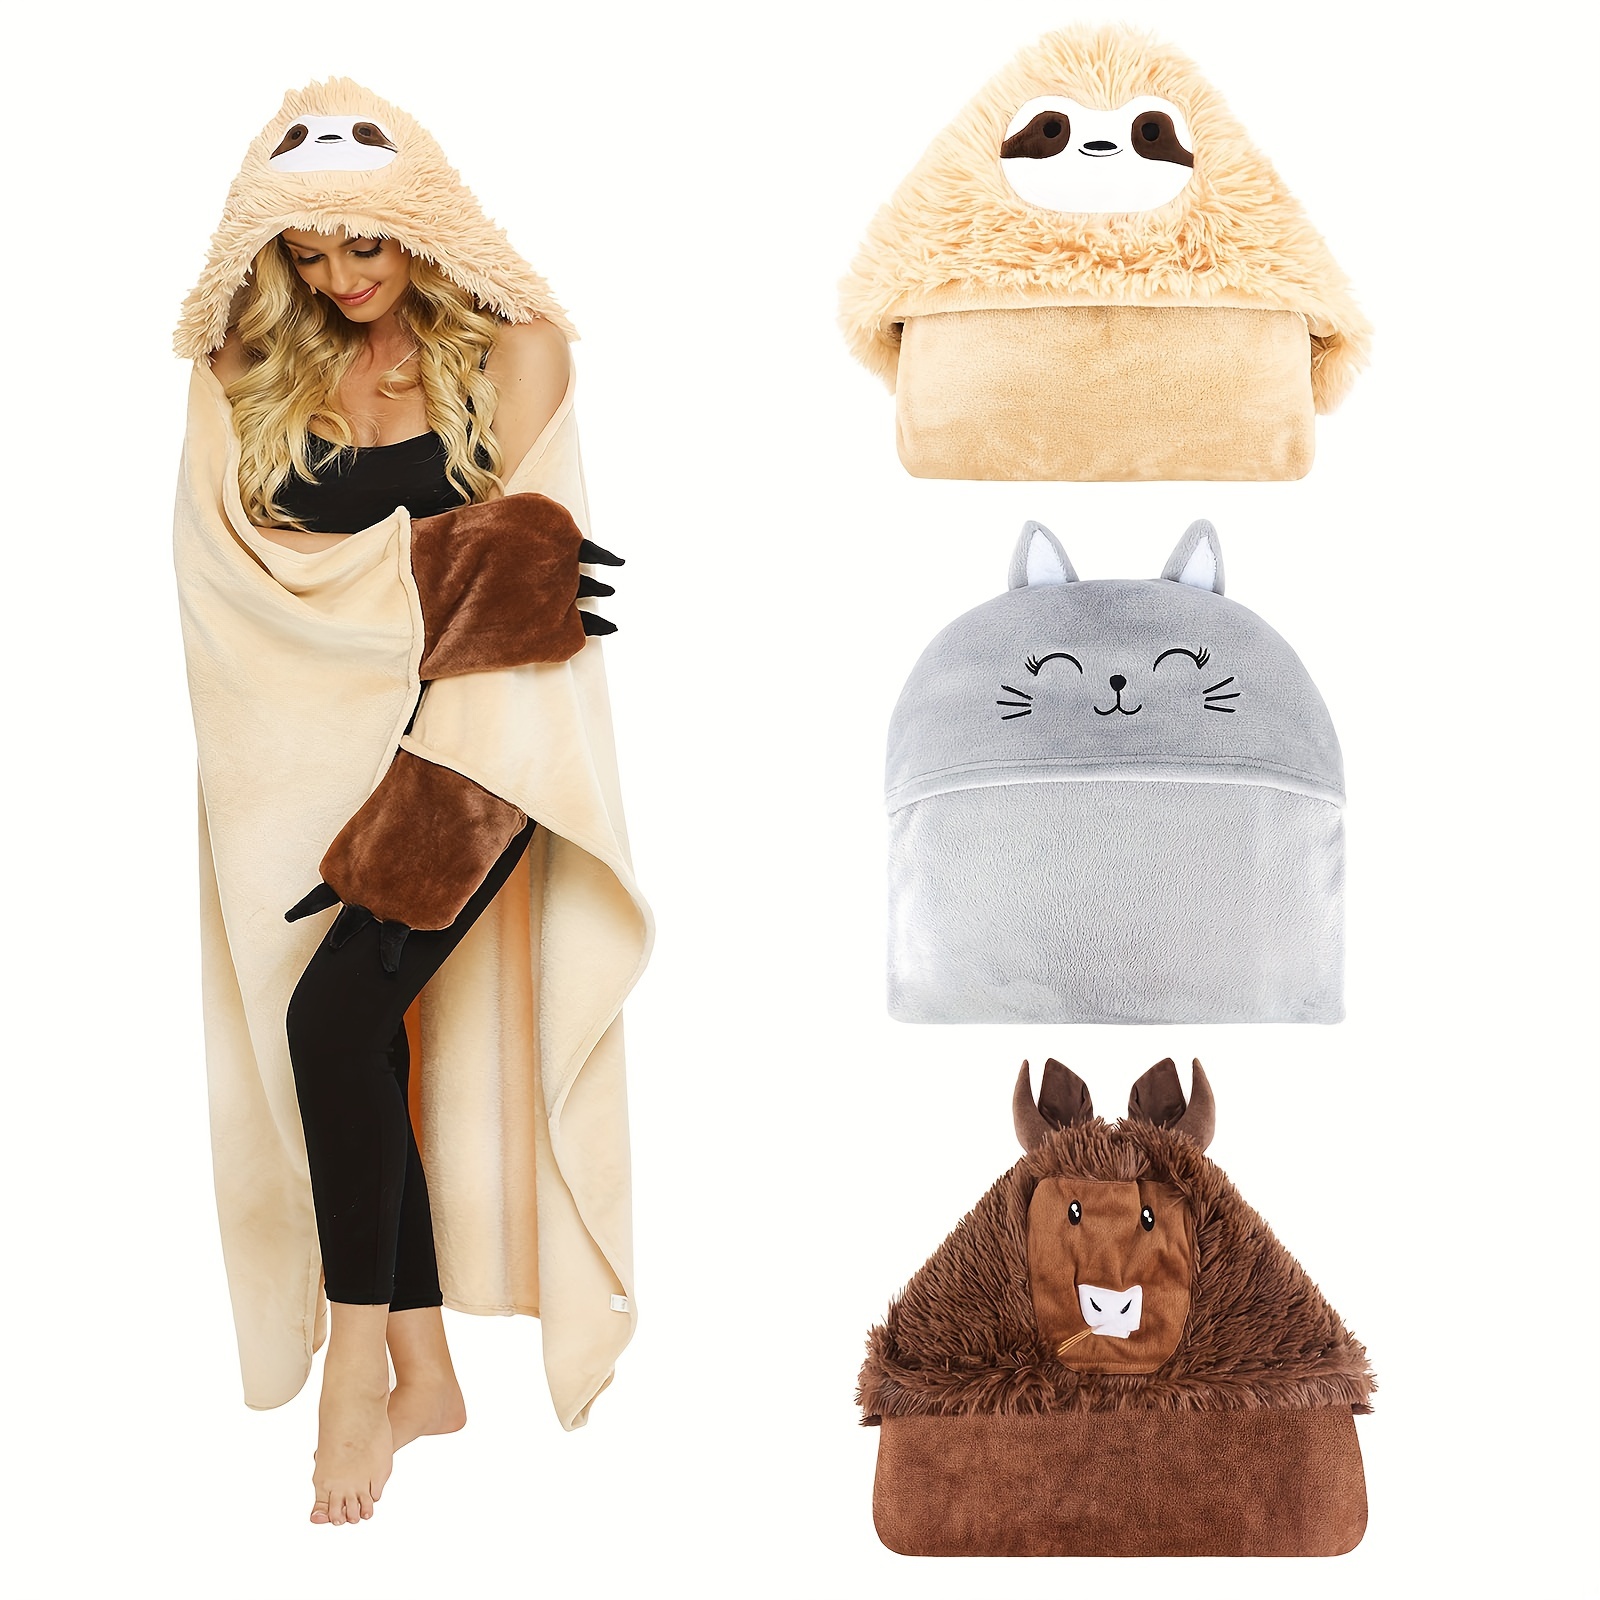 

Sloth Cat Highland Cow Gifts For Women Wearable Hooded Blanket Soft Cute Warm Fluffy Sloth Cat Highland Cow Hooded Blanket, 150x130cm/59x51 Inch